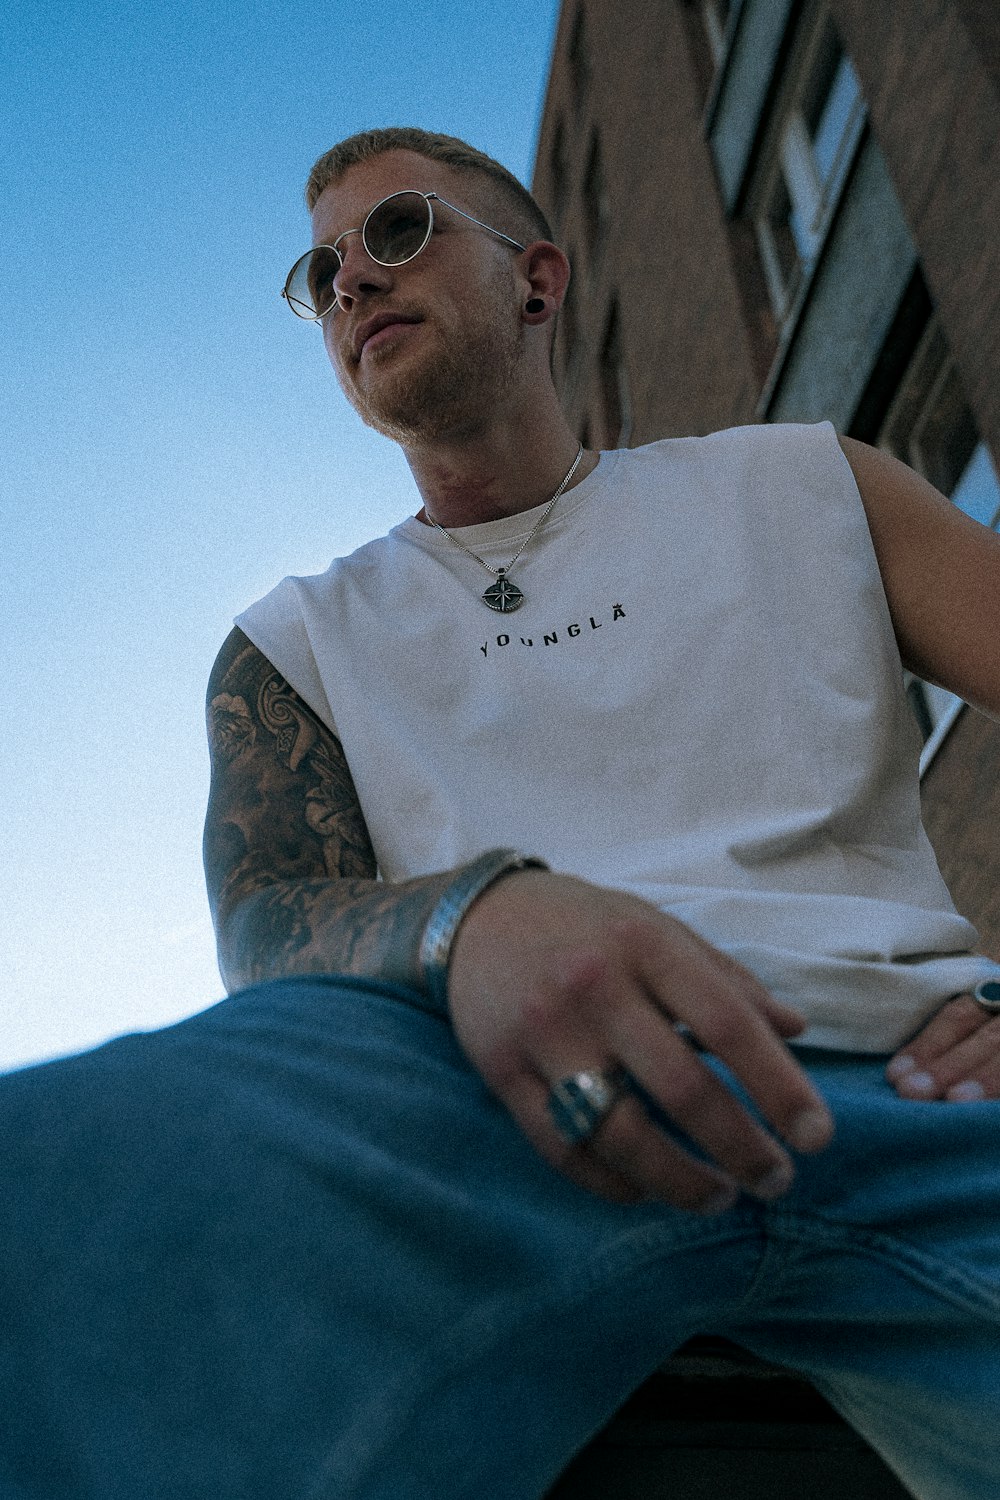 a man with tattoos and glasses